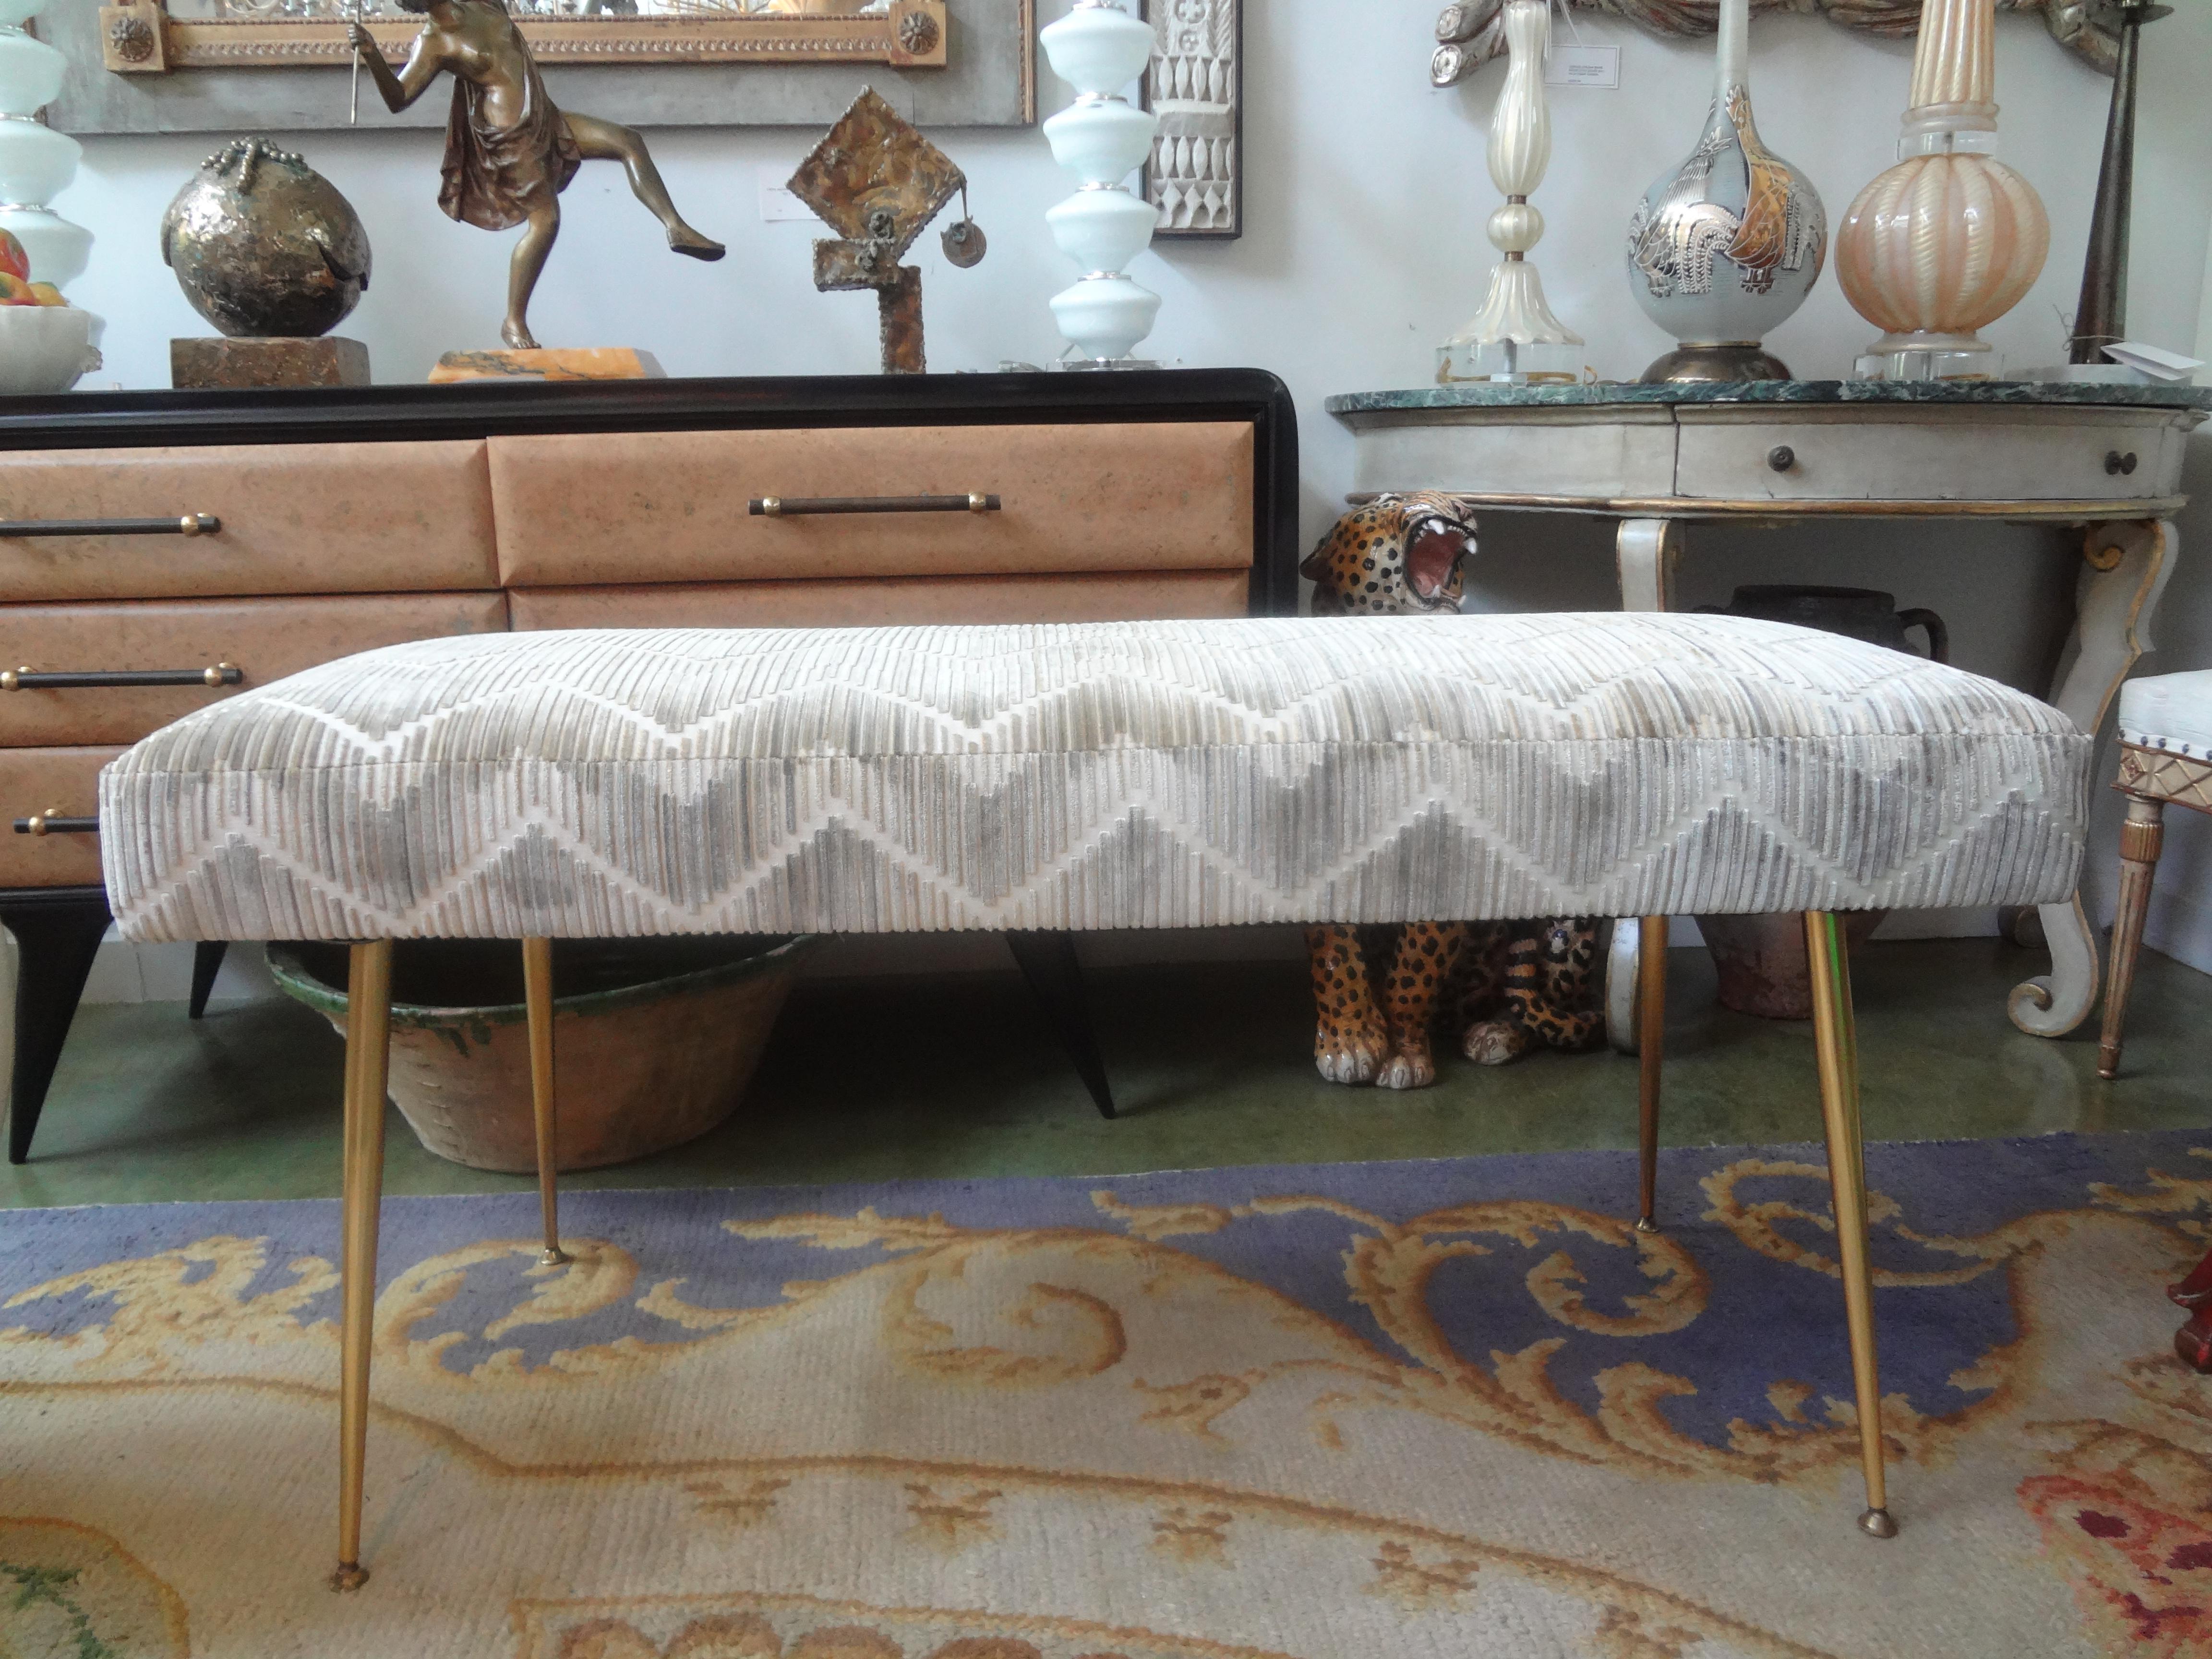 Italian Modern Gio Ponti inspired brass bench.
Stunning Italian Modern Gio Ponti inspired brass bench with splayed legs. This gorgeous Italian Mid-Century Modern brass bench has been professionally upholstered in a neutral cut velvet chevron